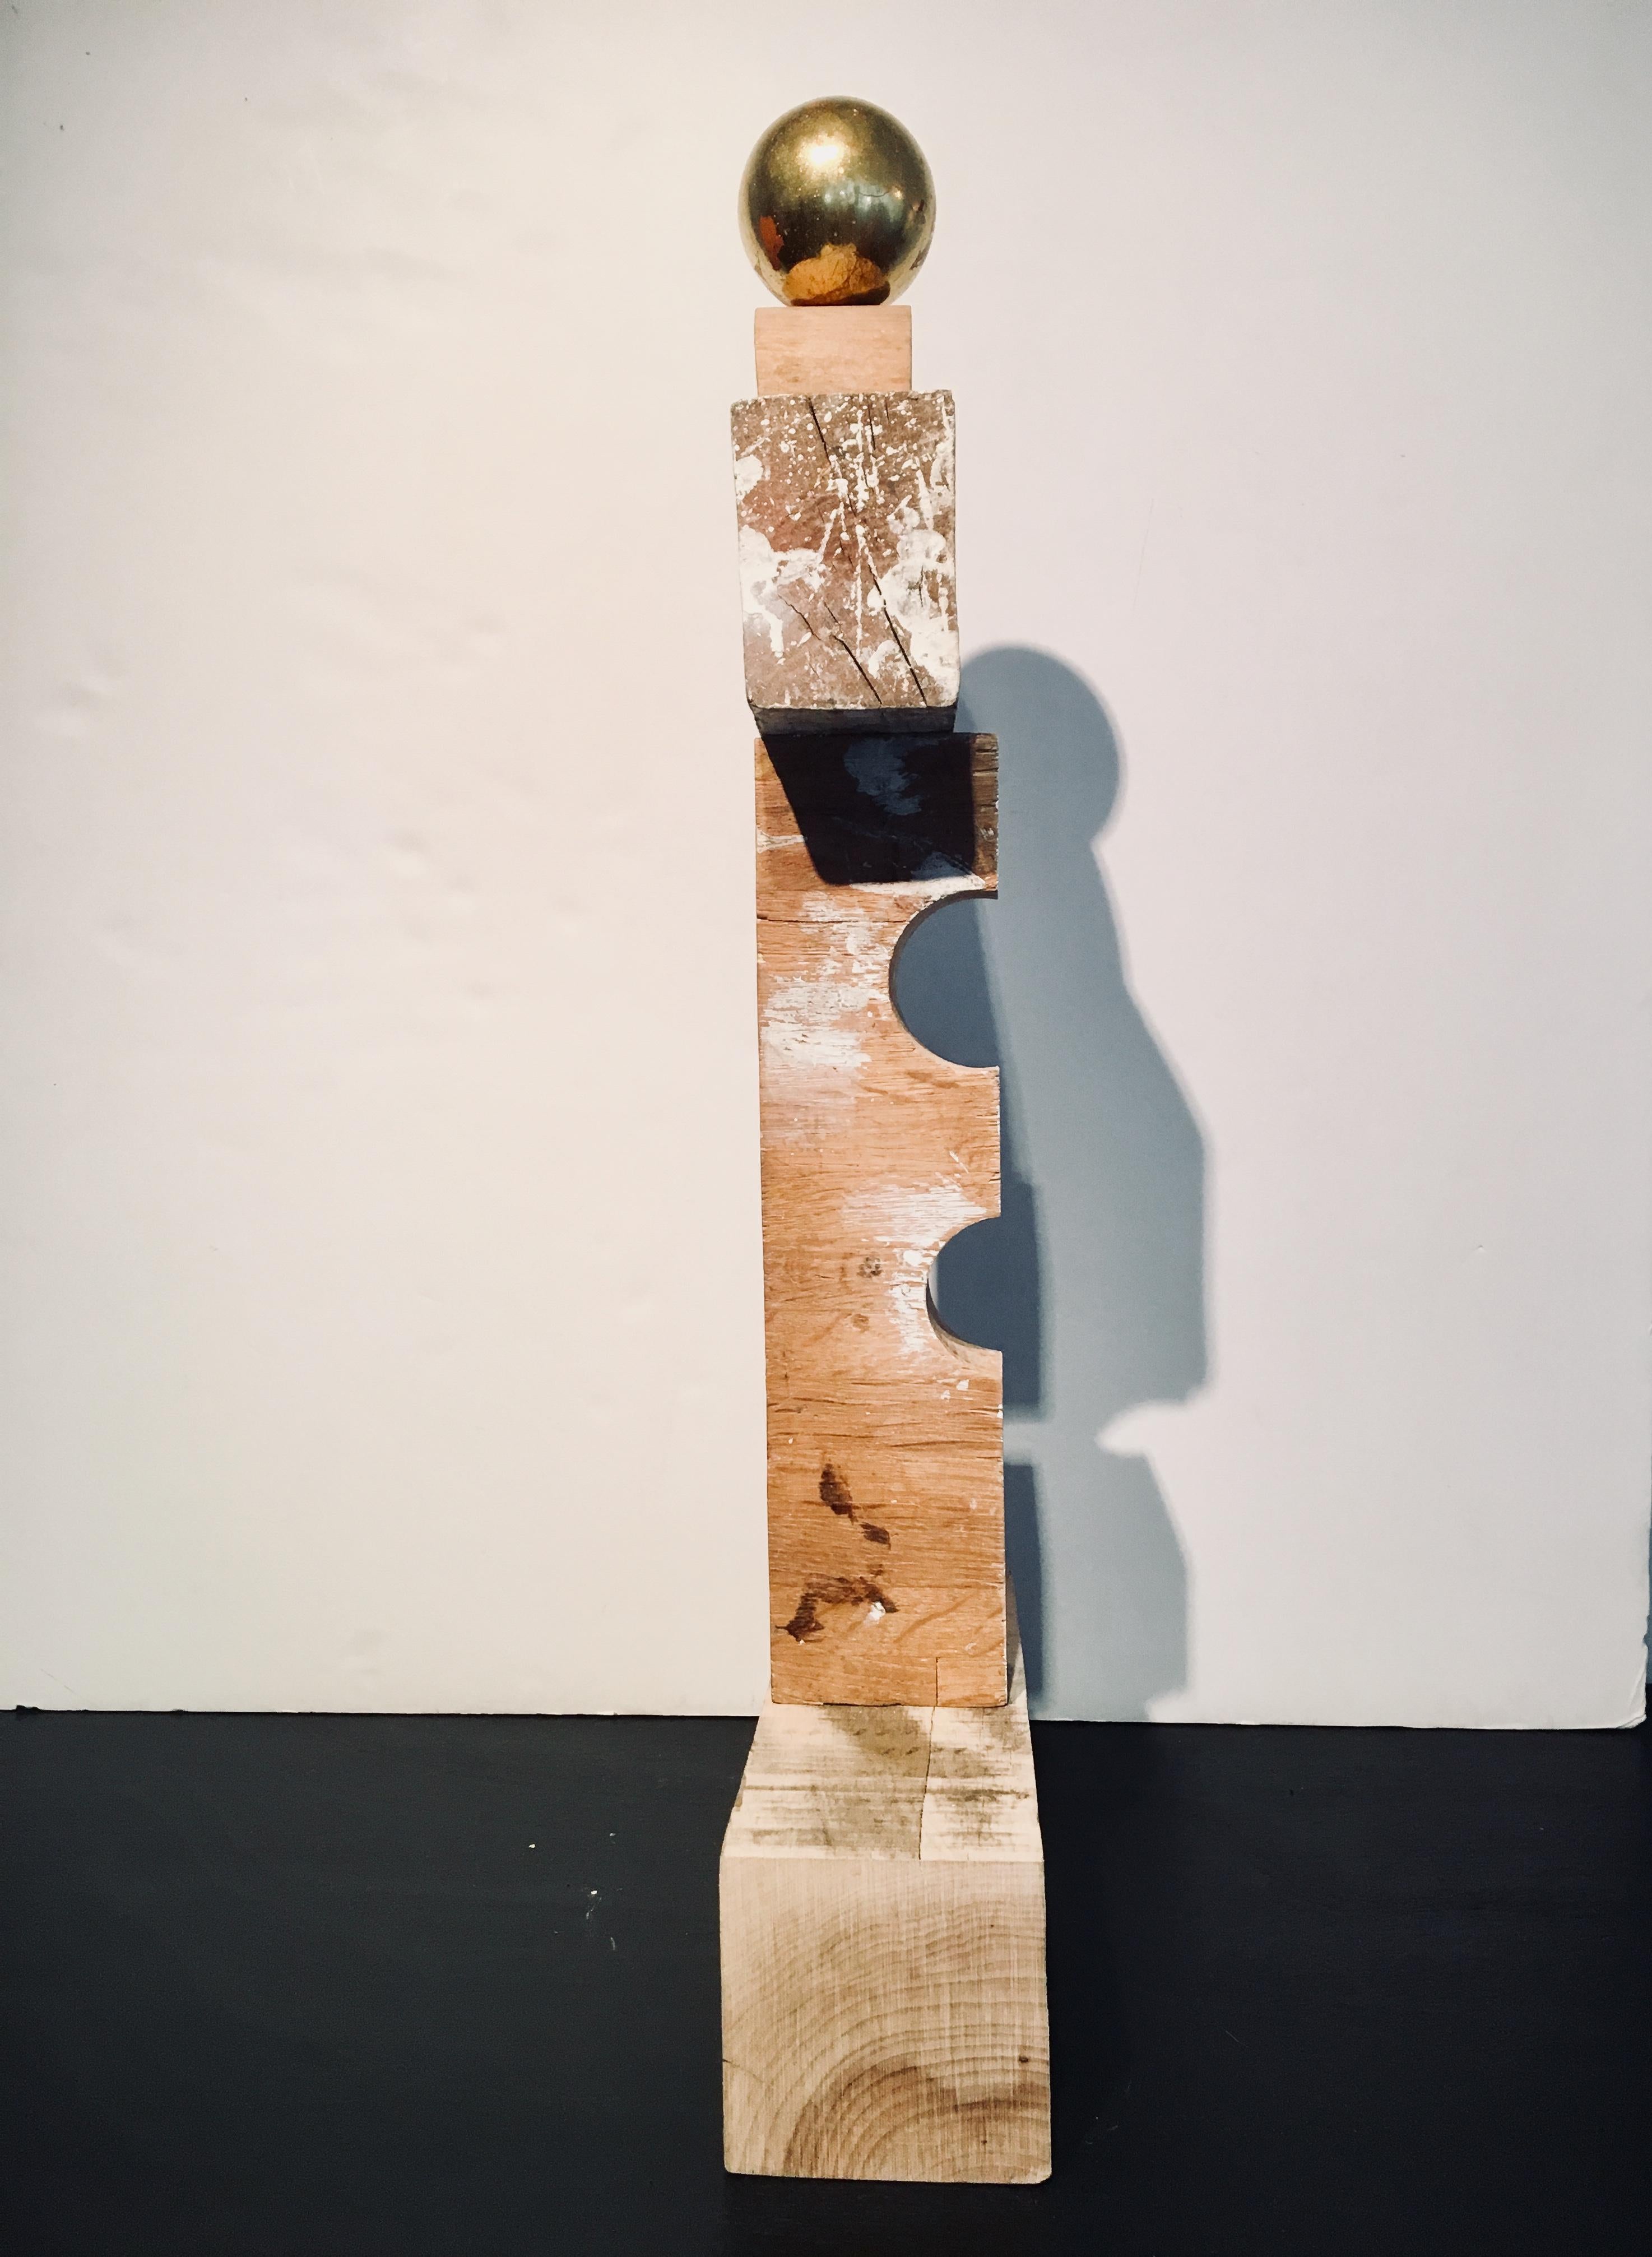 The artistic collaboration of Kelly Bugden + Van Wifvat has produced a thought-provoking body of sculptures, paintings, and constructions. Nature, childhood memories, and everyday archetypes take shape in unexpected combinations of materials. The